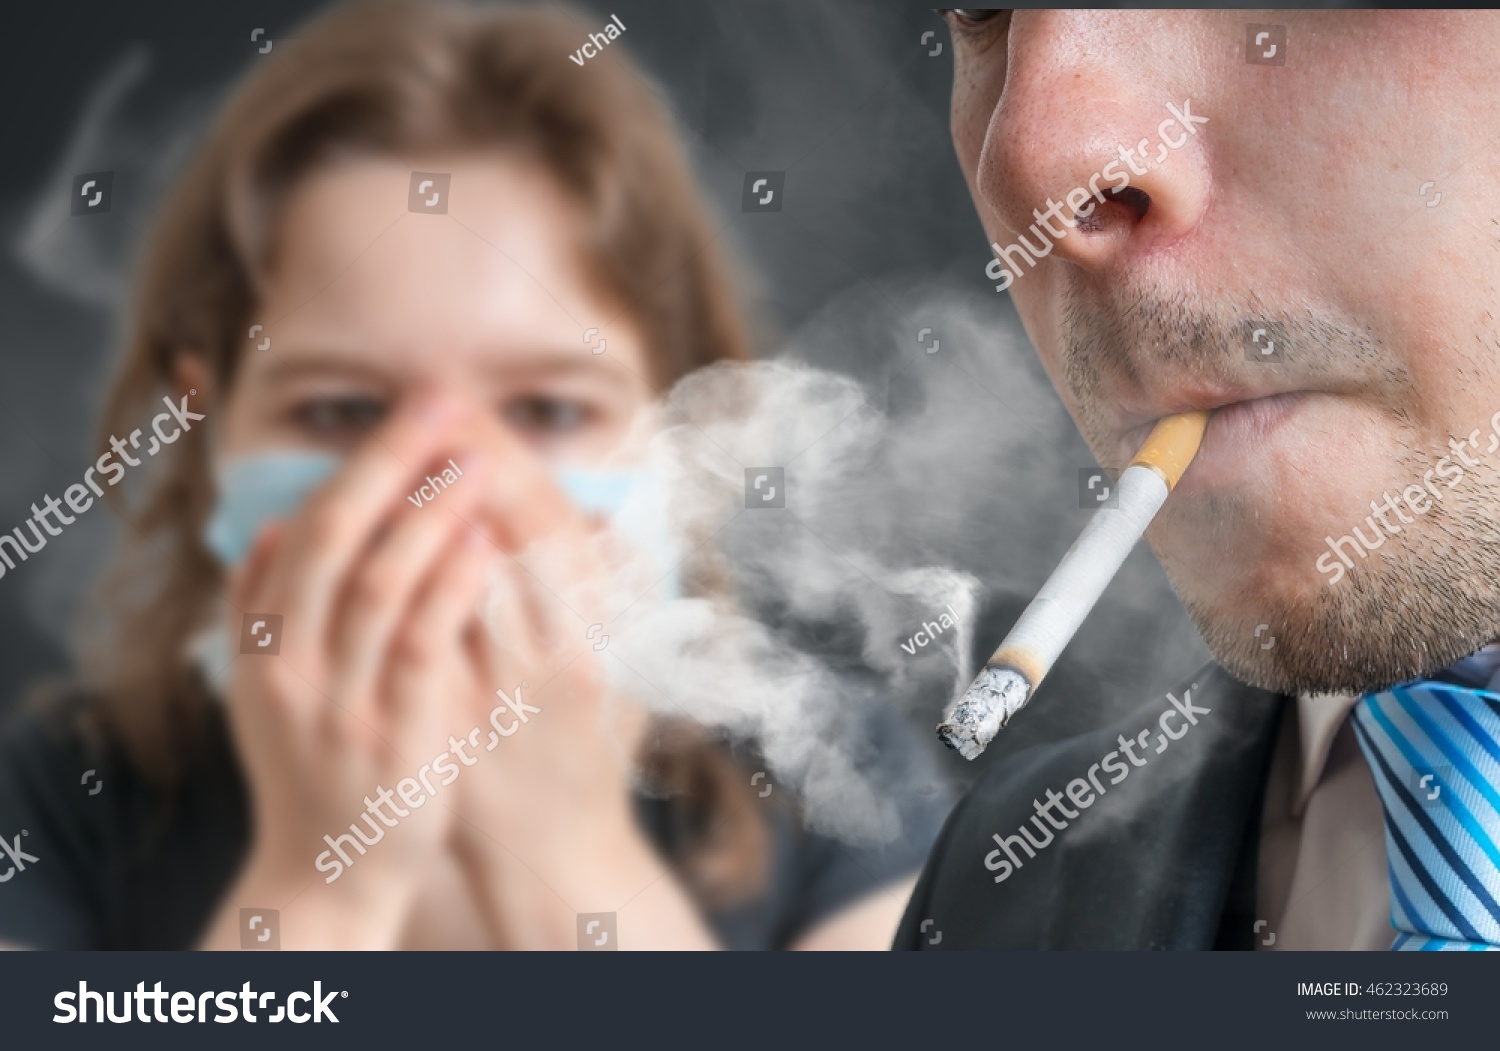 Passive smoking concept. Man is smoking cigarette and woman is covering her face. A lot of smoke around. #462323689